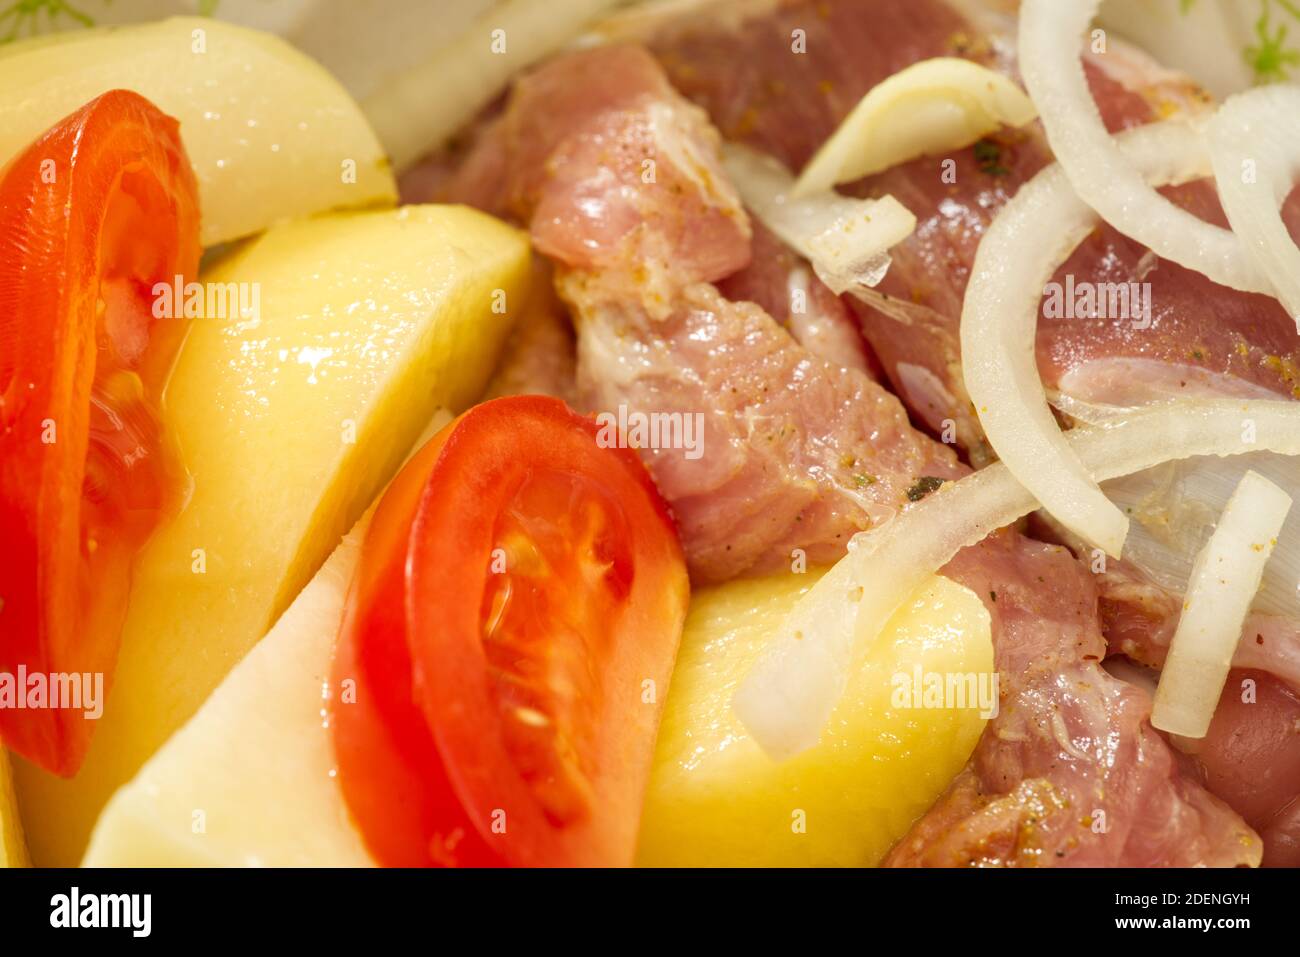 pork meat, potatoes, tomatoes and onions, ready to bake Stock Photo